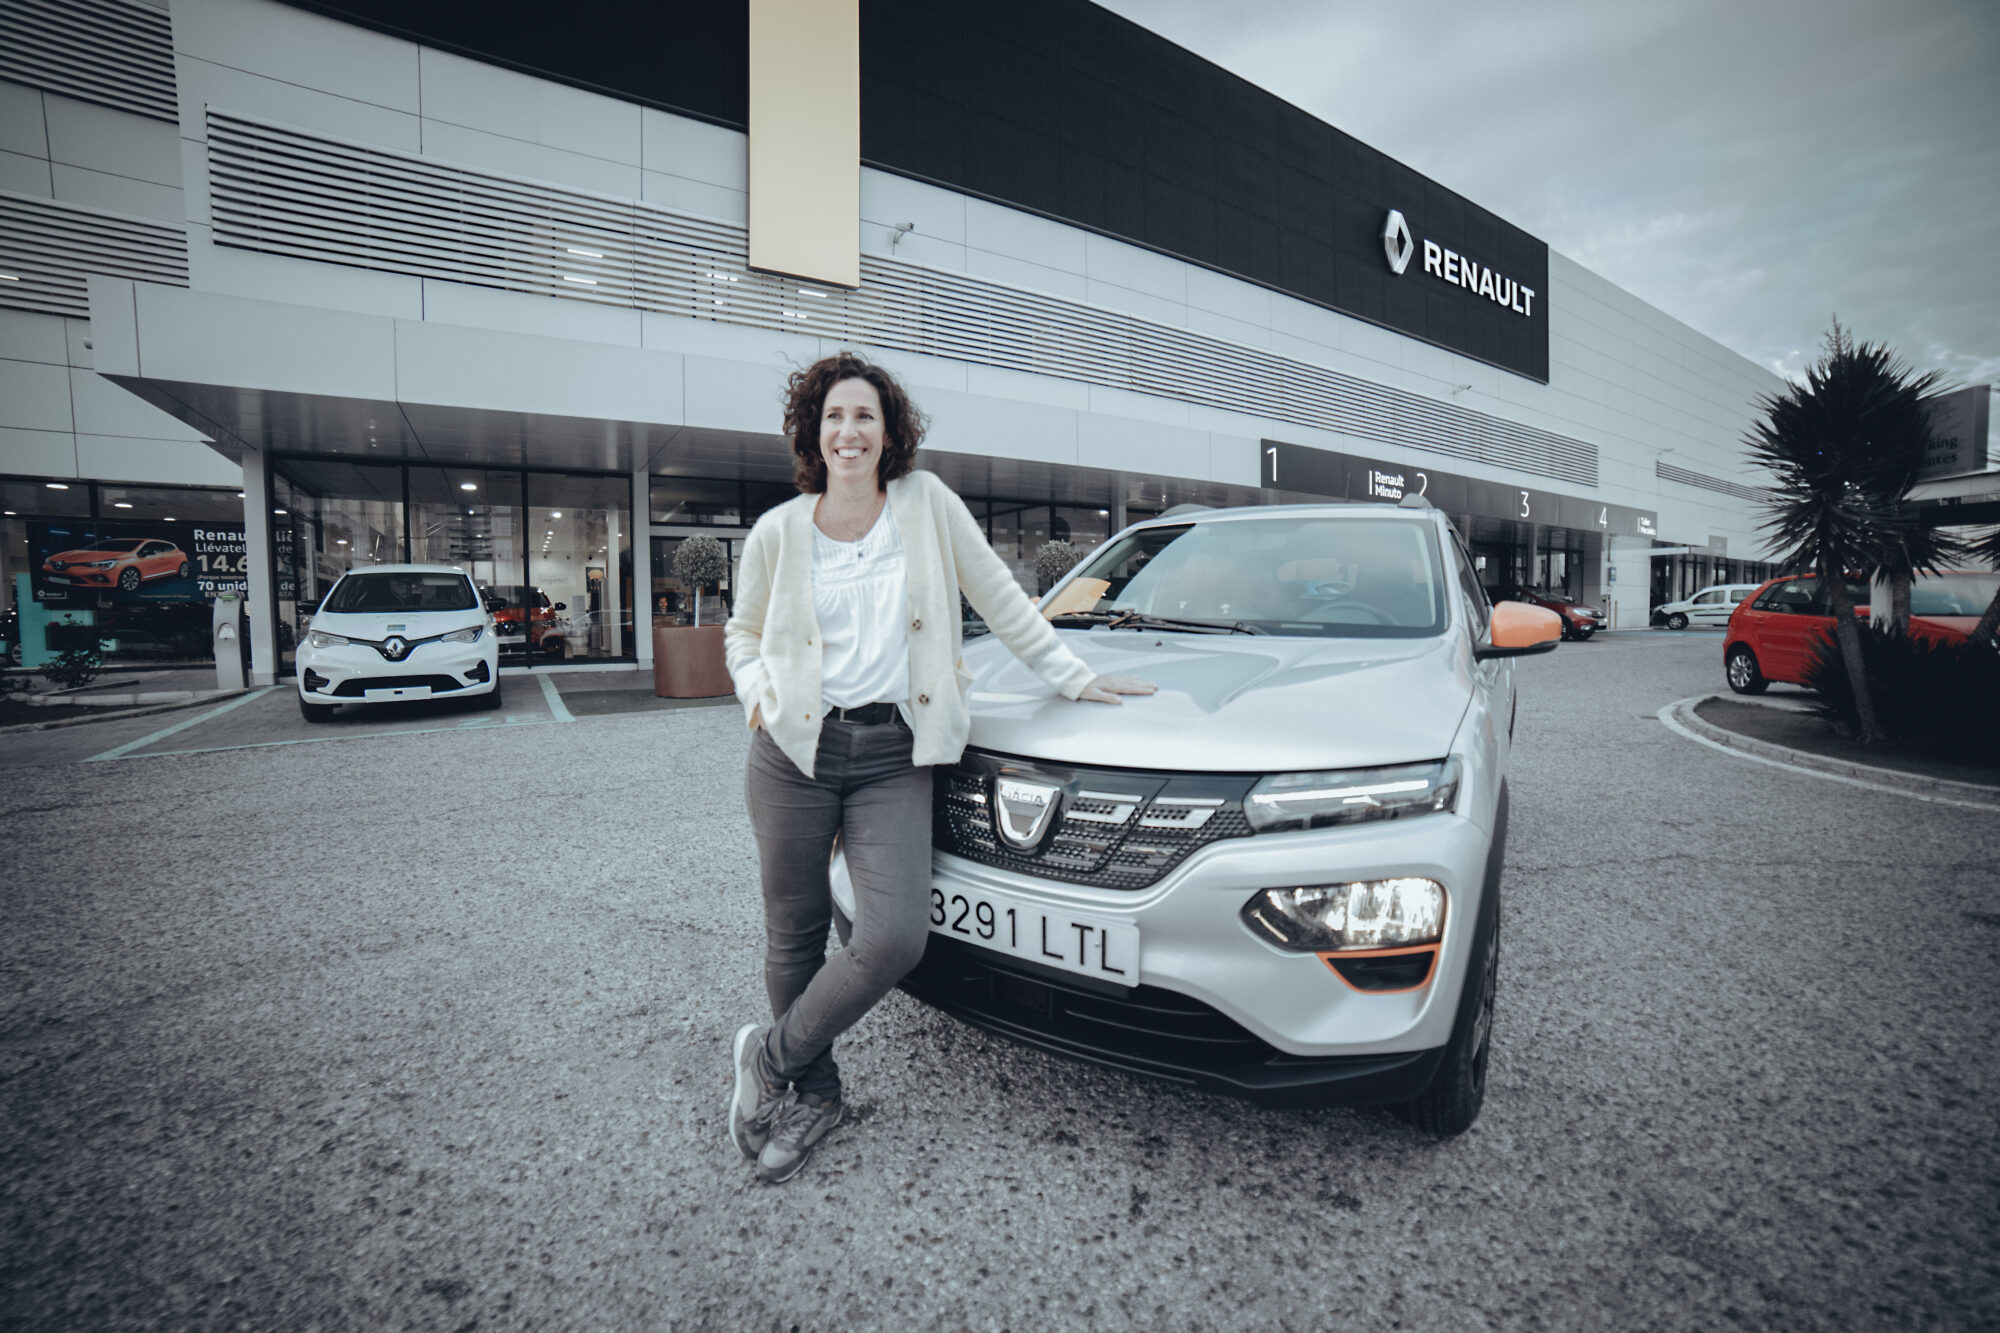 2021 - Story Dacia - Changing the way we drive and get about – 8 out of 10 people in Europe want electric mobility